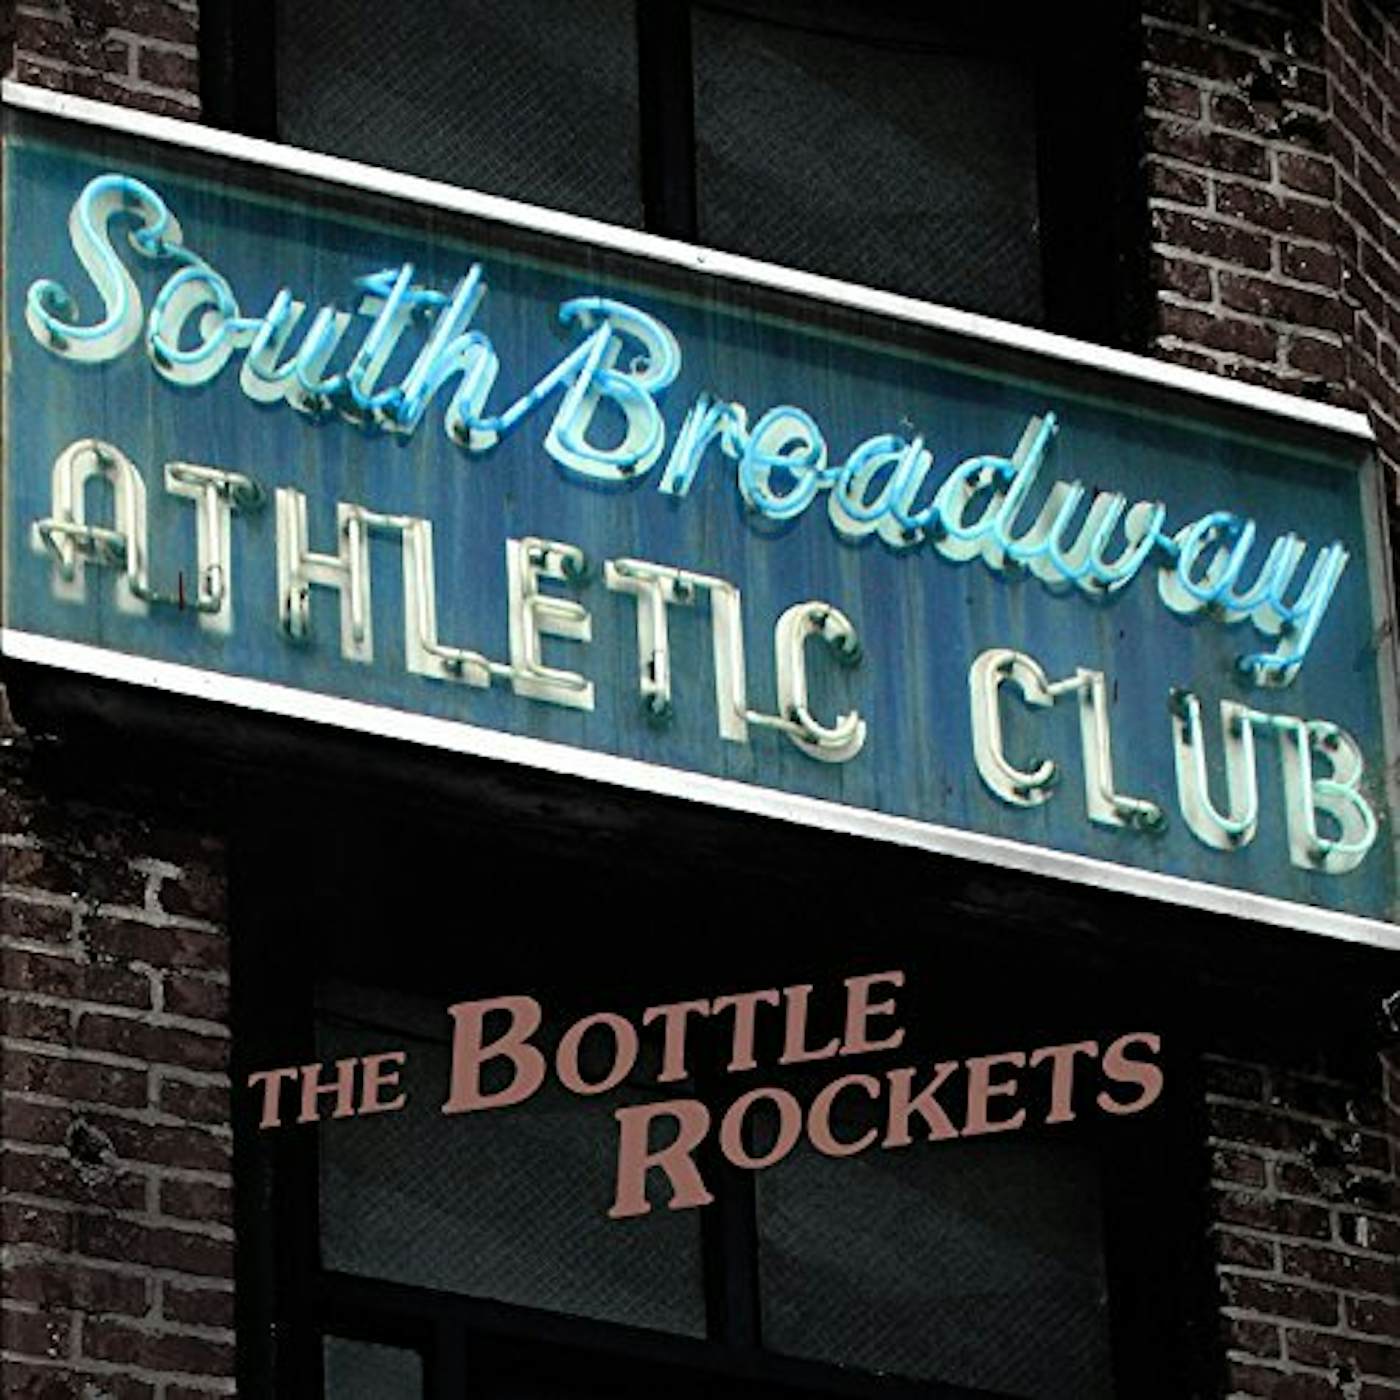 The Bottle Rockets South Broadway Athletic Club Vinyl Record